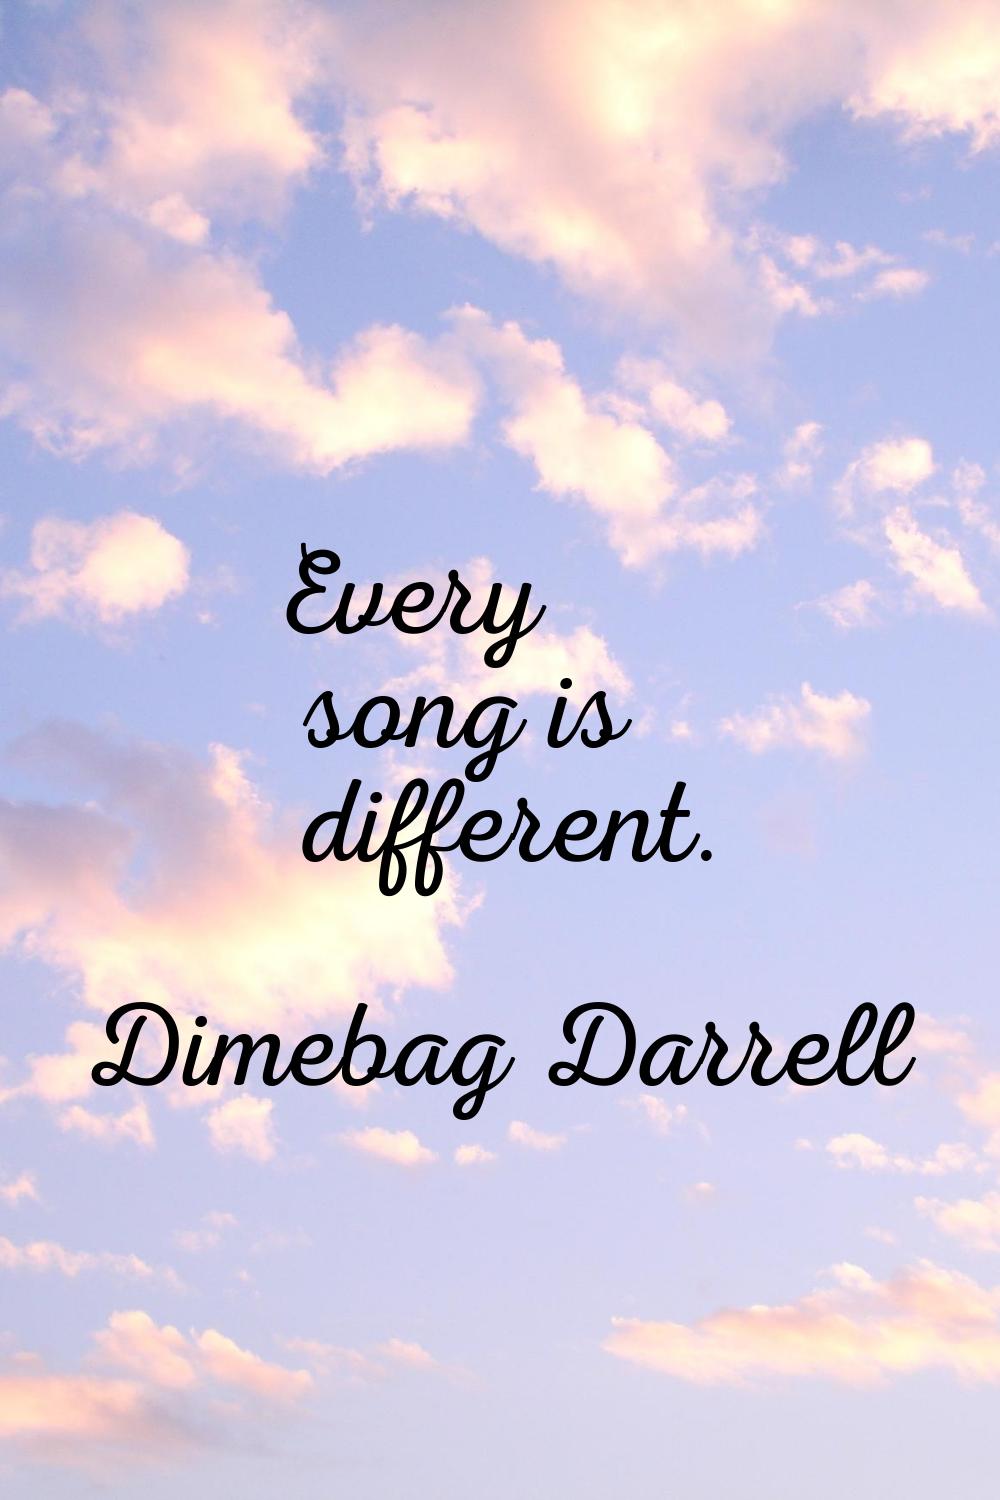 Every song is different.